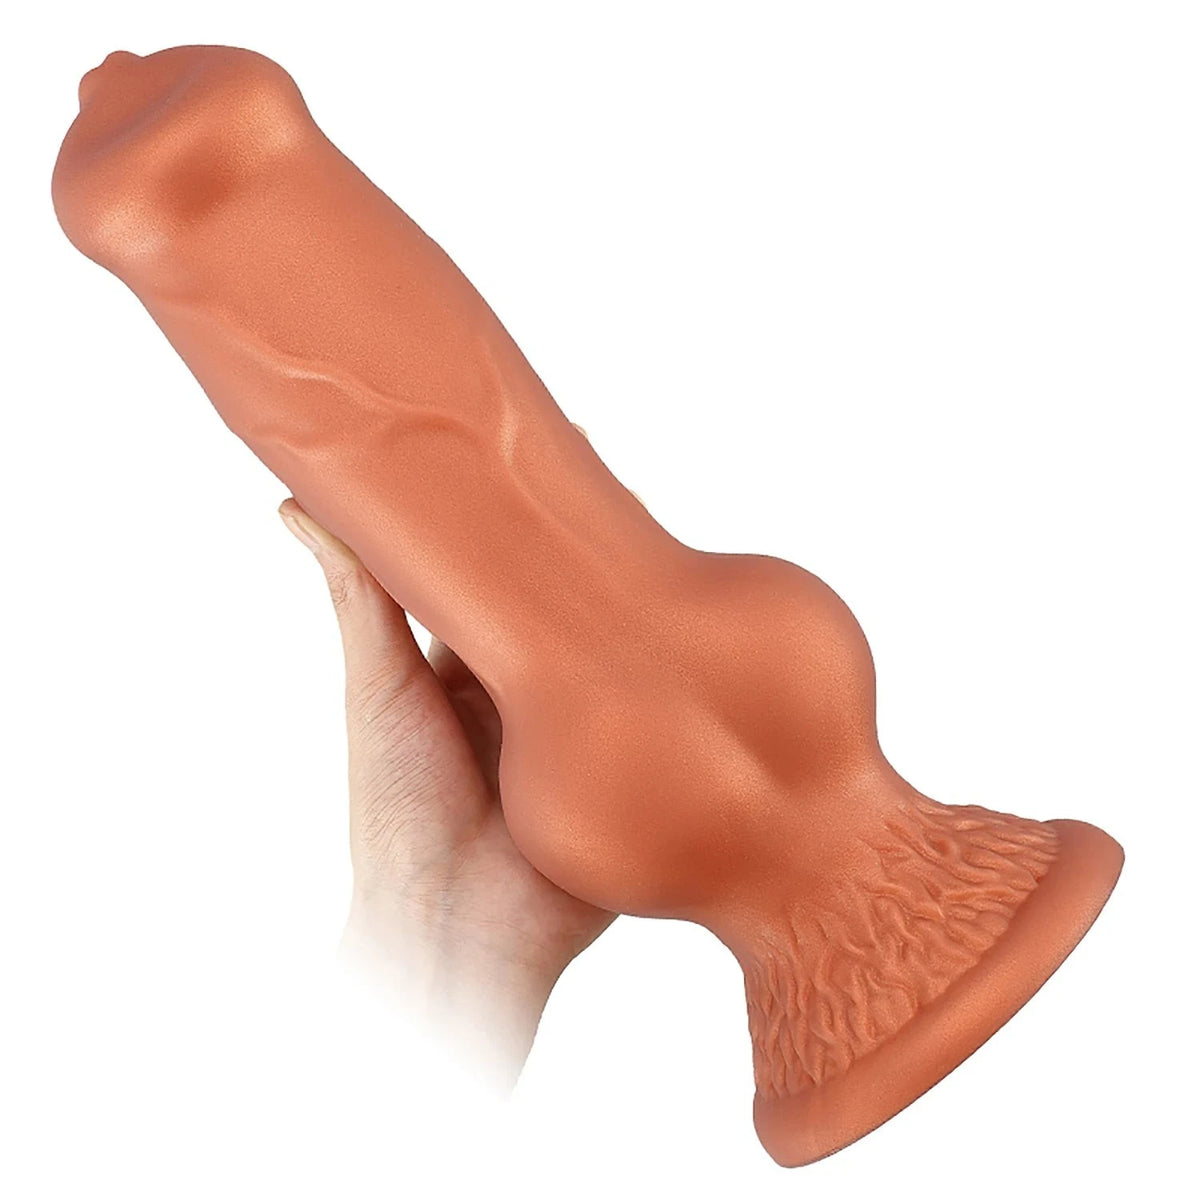 Knotted by Wolves - Anal Toy - Twisted Jezebel